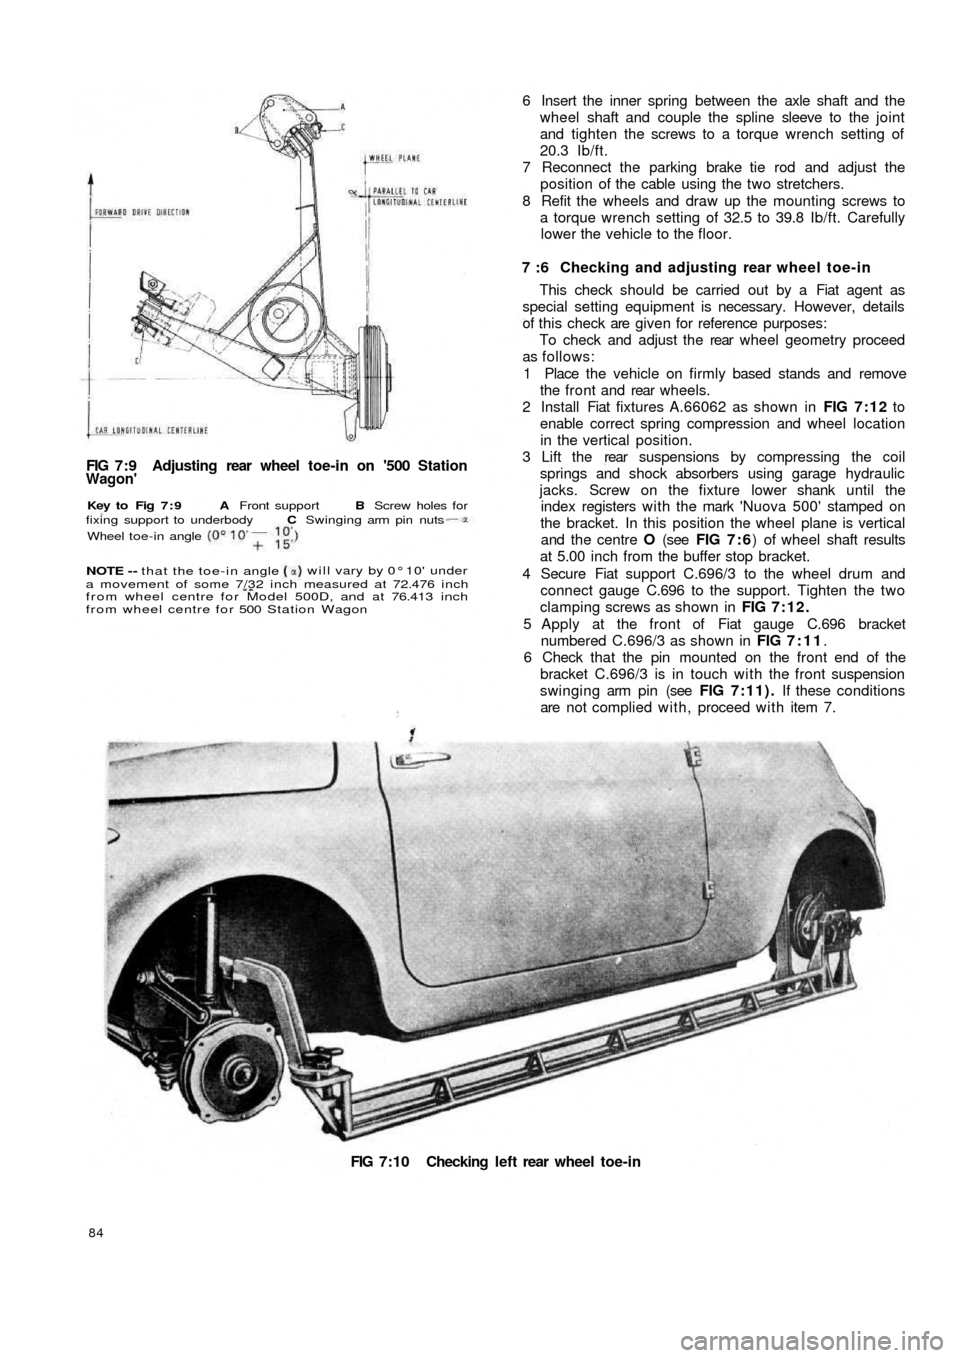 FIAT 500 1957 1.G Workshop Manual FIG 7:9  Adjusting  rear  wheel toe-in on 500 StationWagon
FIG 7:10 Checking left rear wheel toe-in
84
6 Insert the inner spring between the axle shaft and the
wheel shaft and couple the spline slee